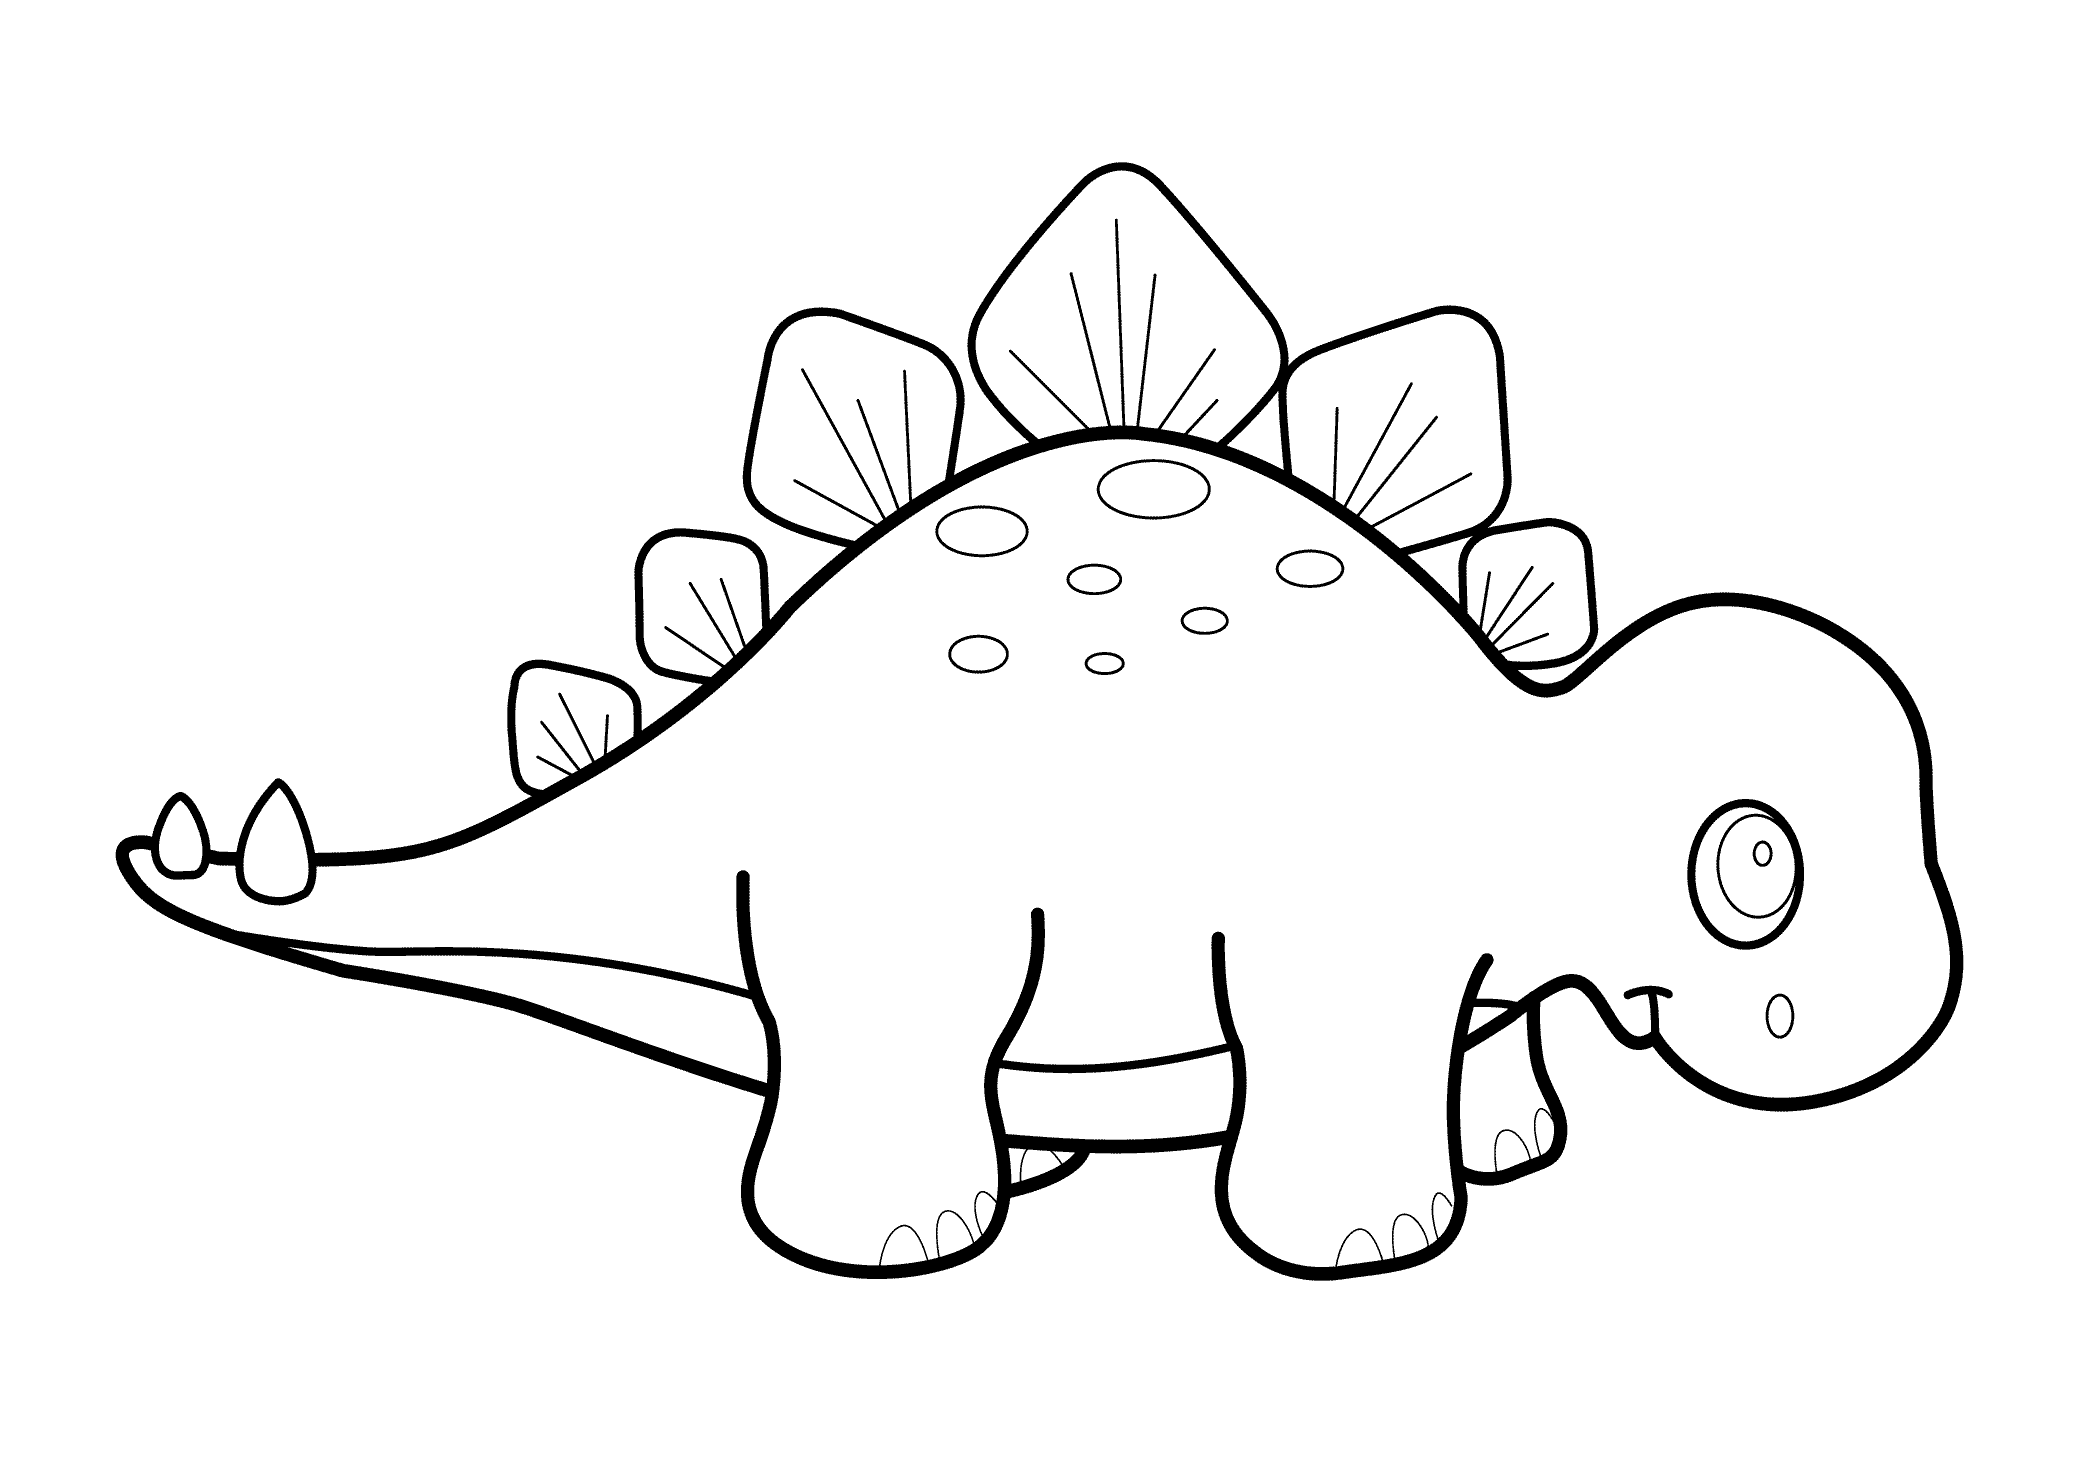 Cute Dinosaurs Coloring Page - Coloring Pages - Coloring Home